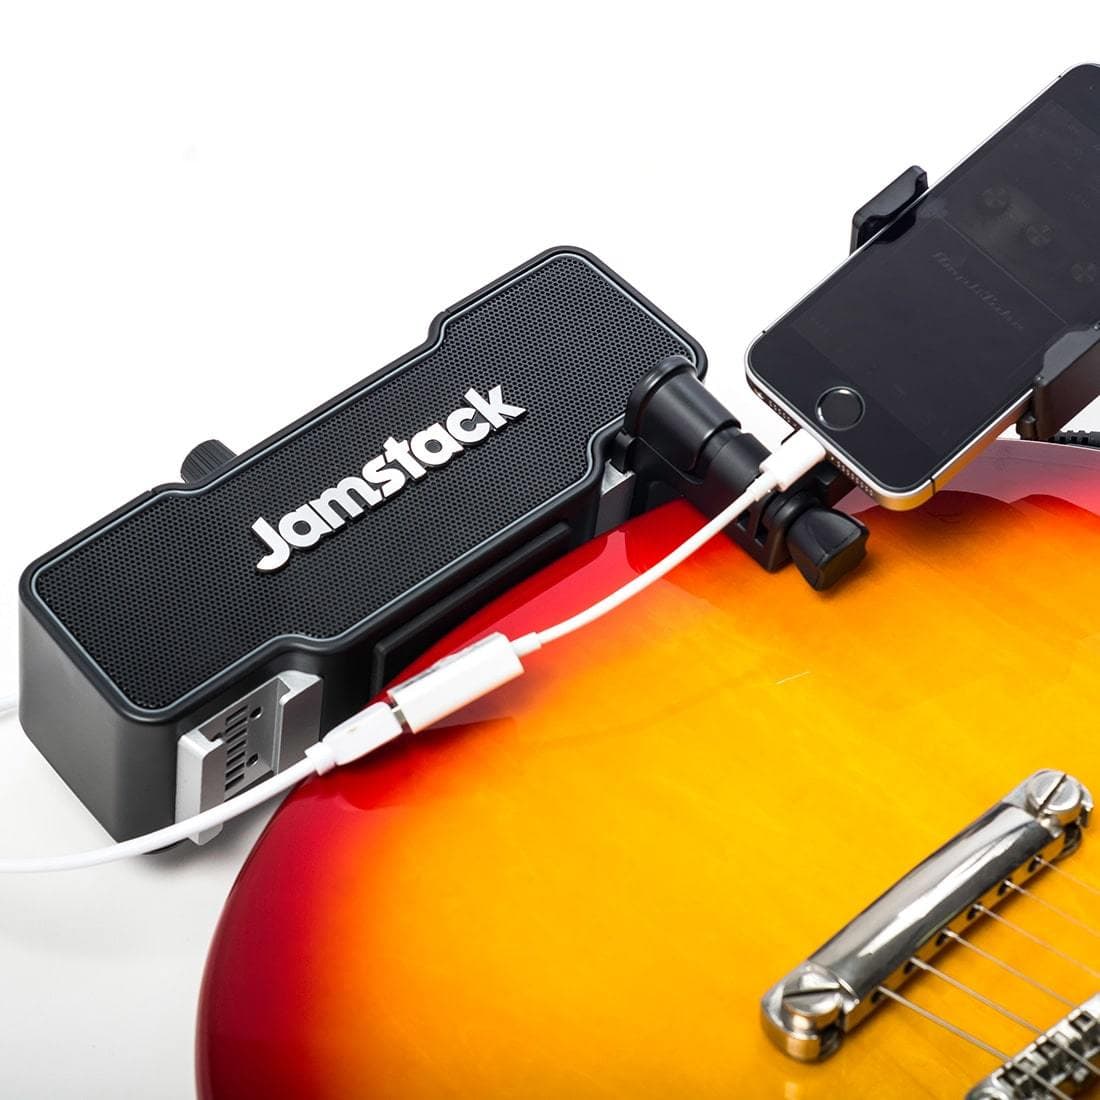 The Jamstack speaker clamps to your guitar.